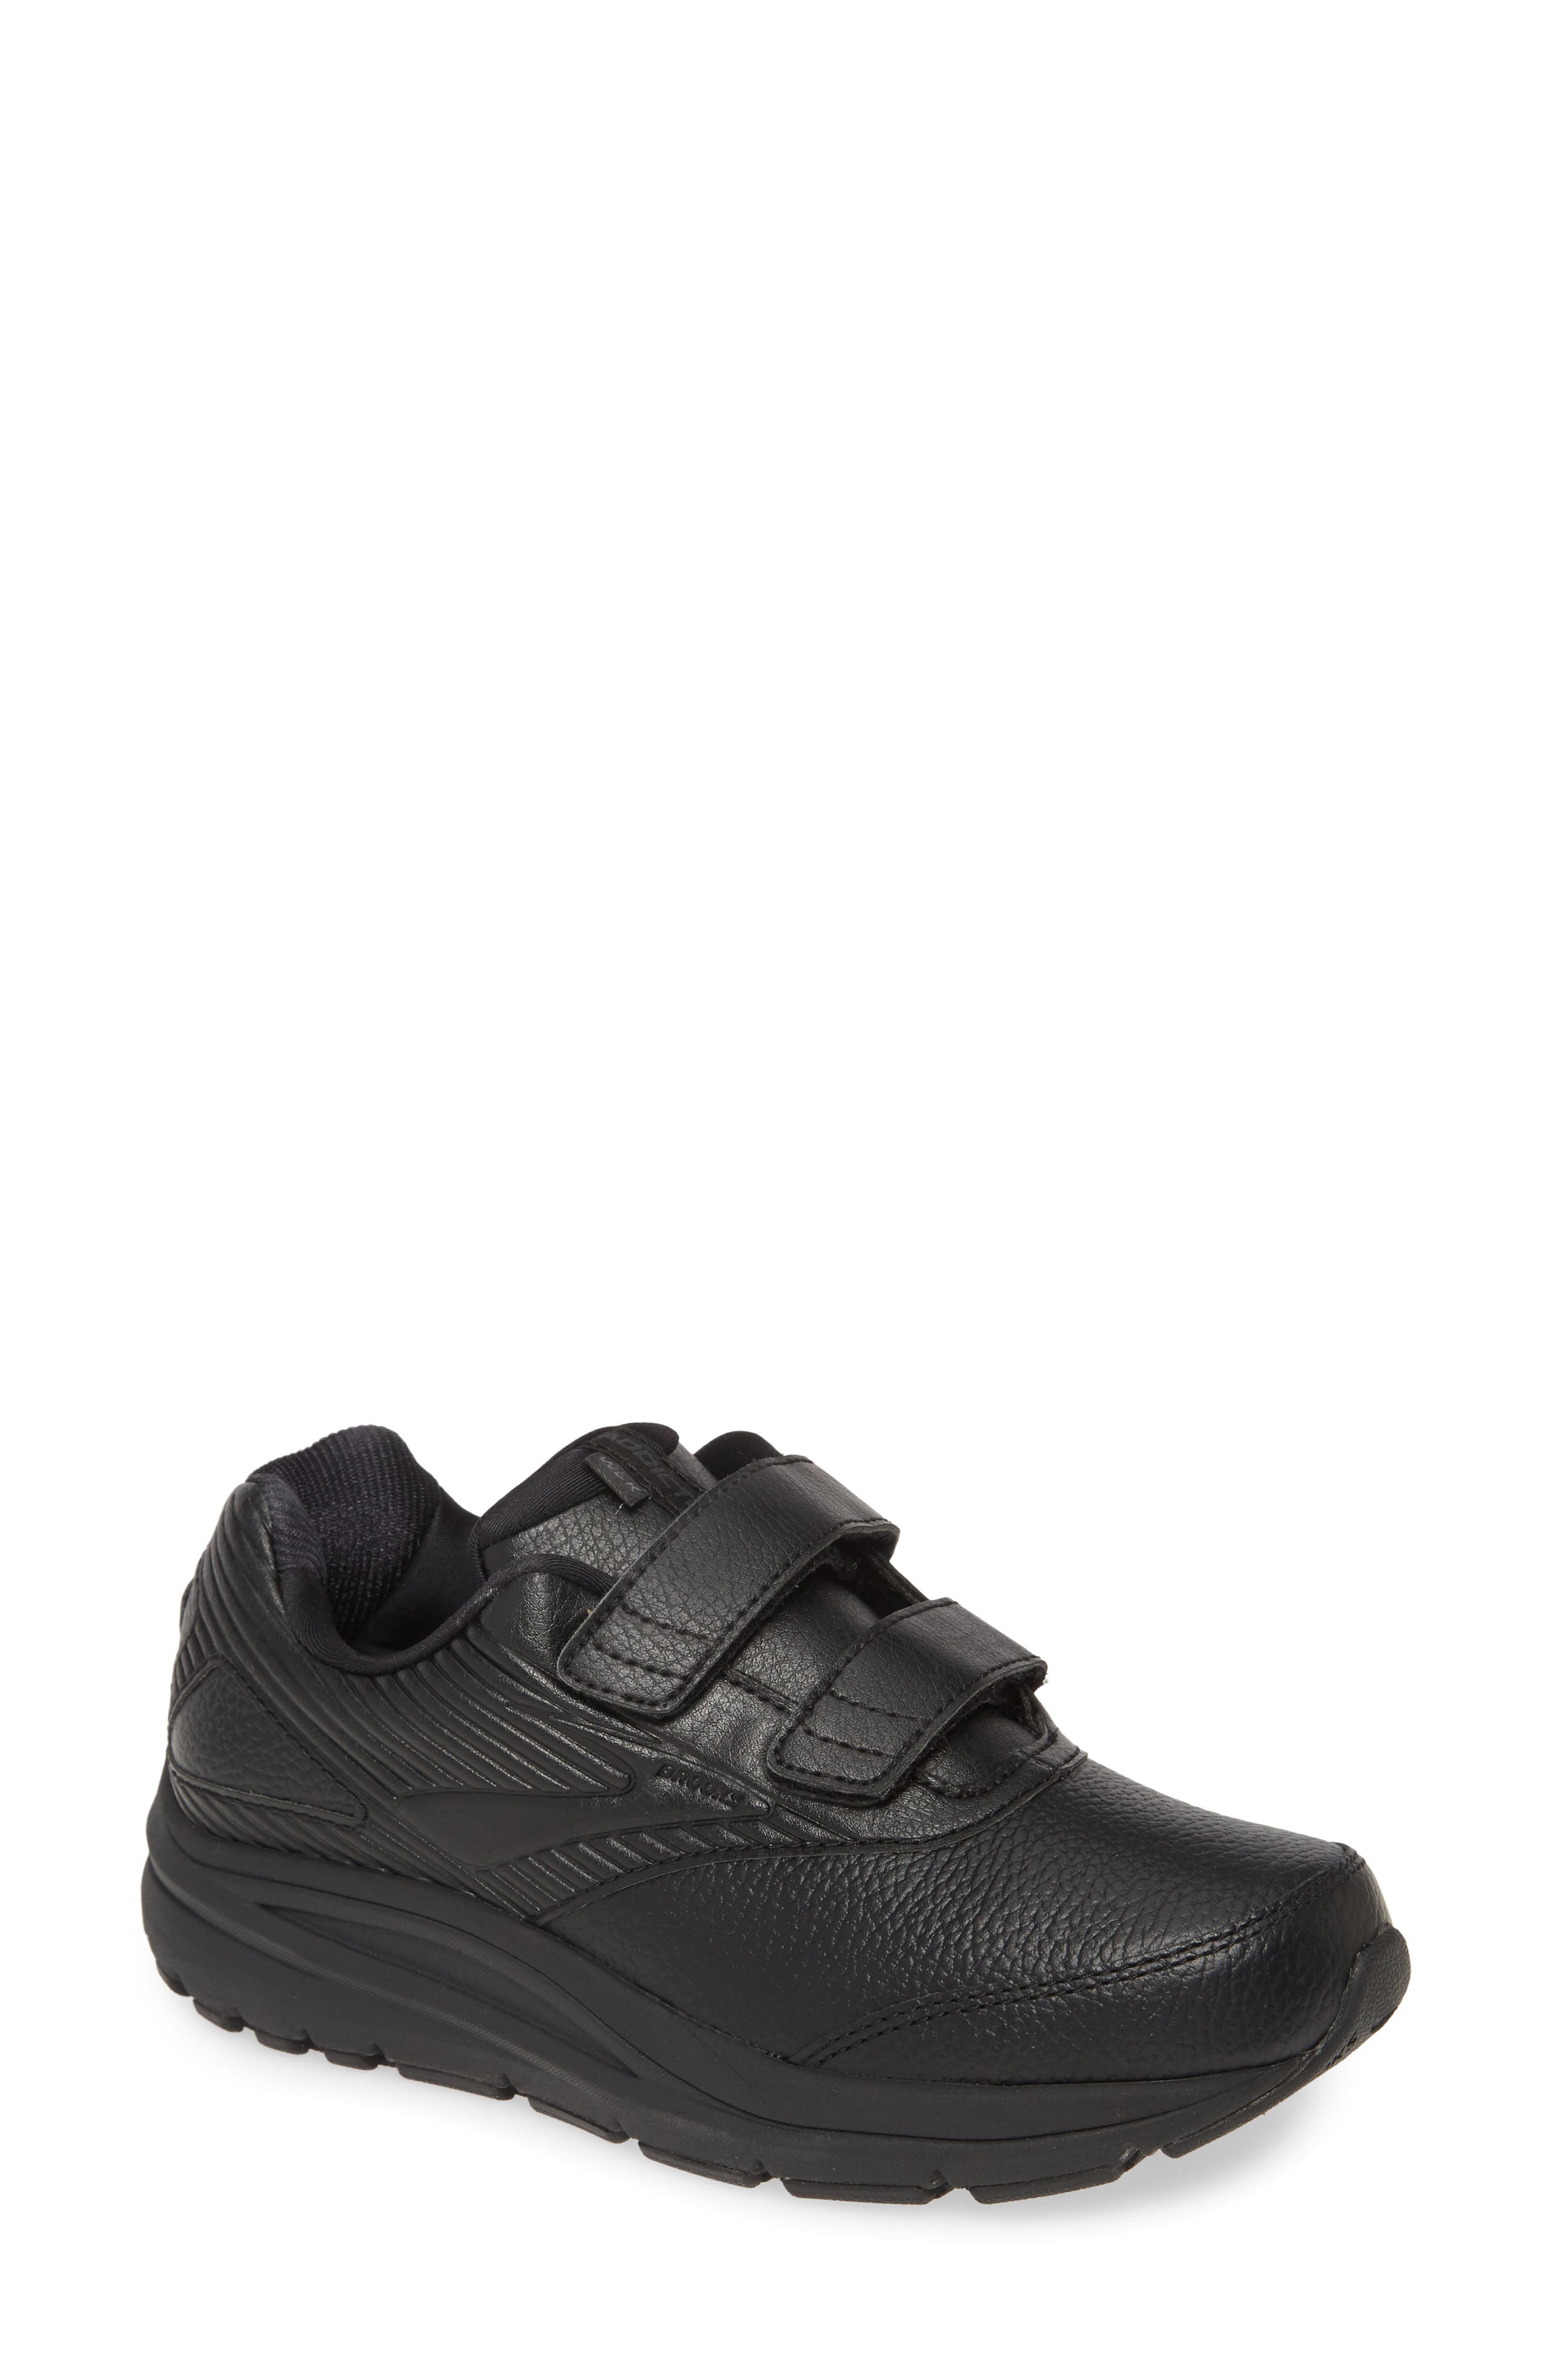 brooks leather shoes womens